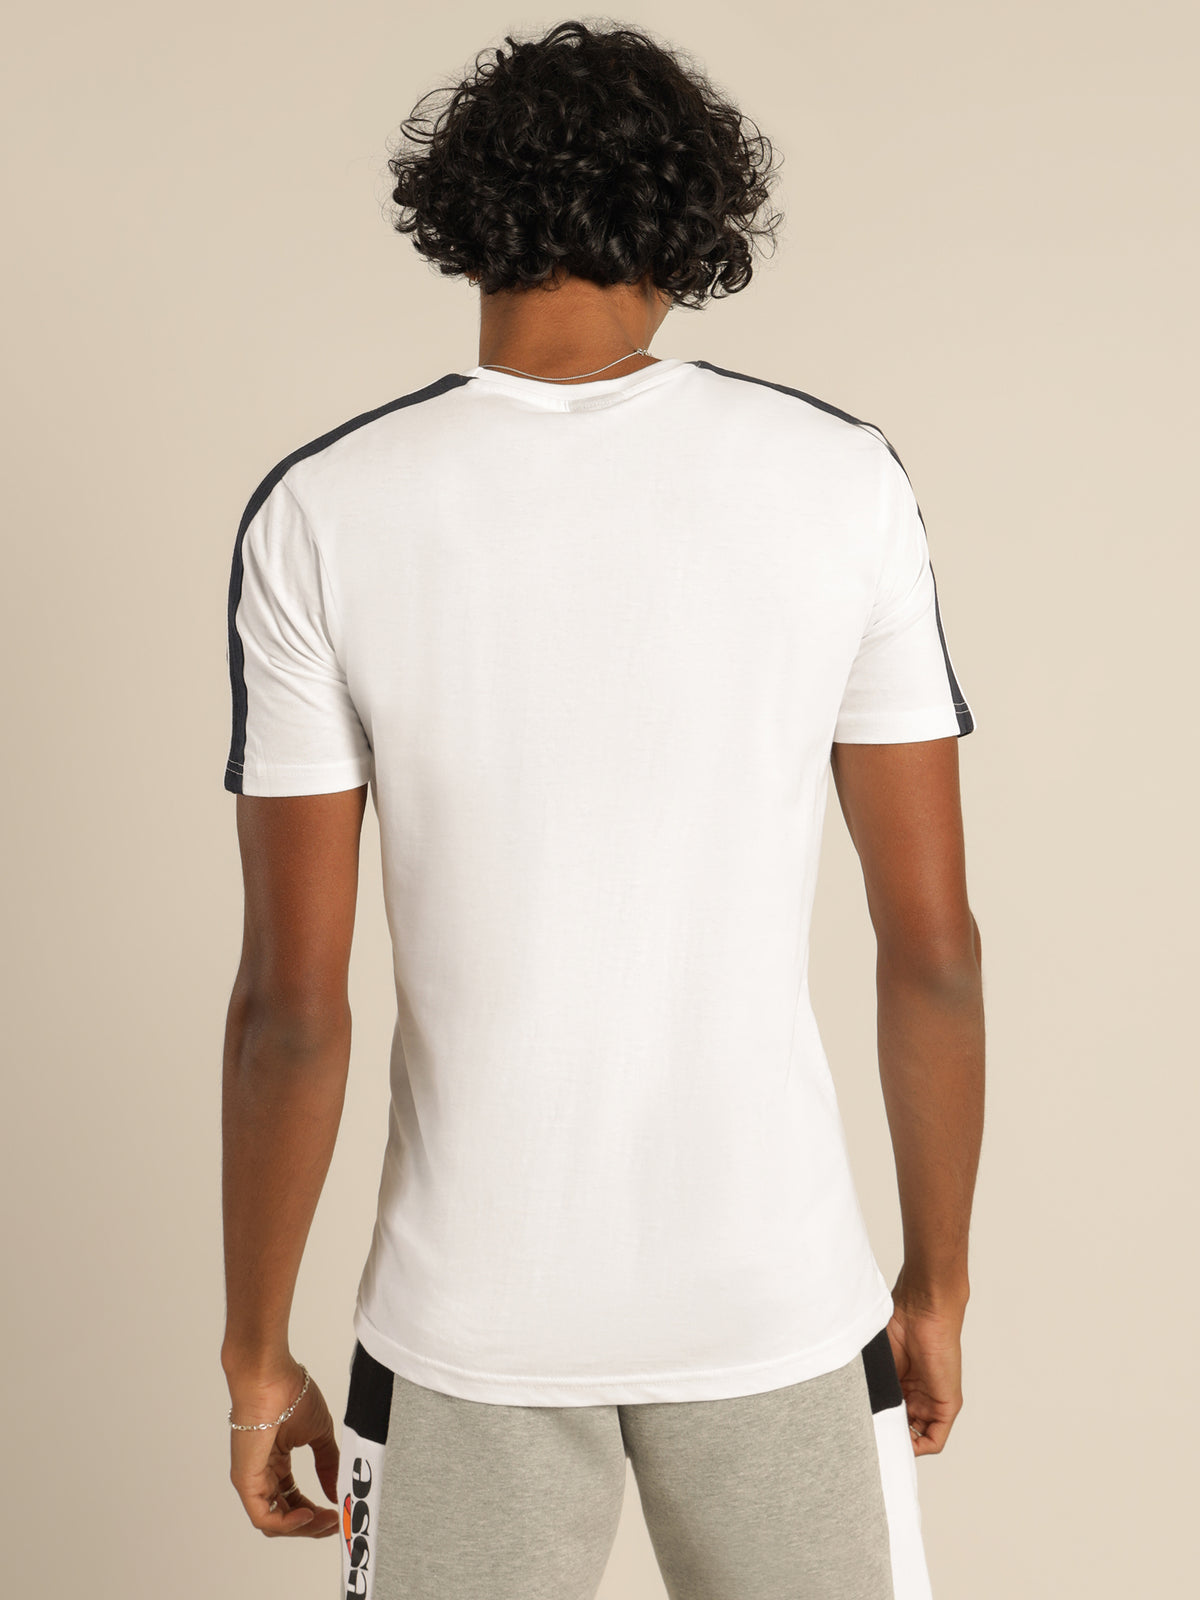 Carcano T-Shirt in White